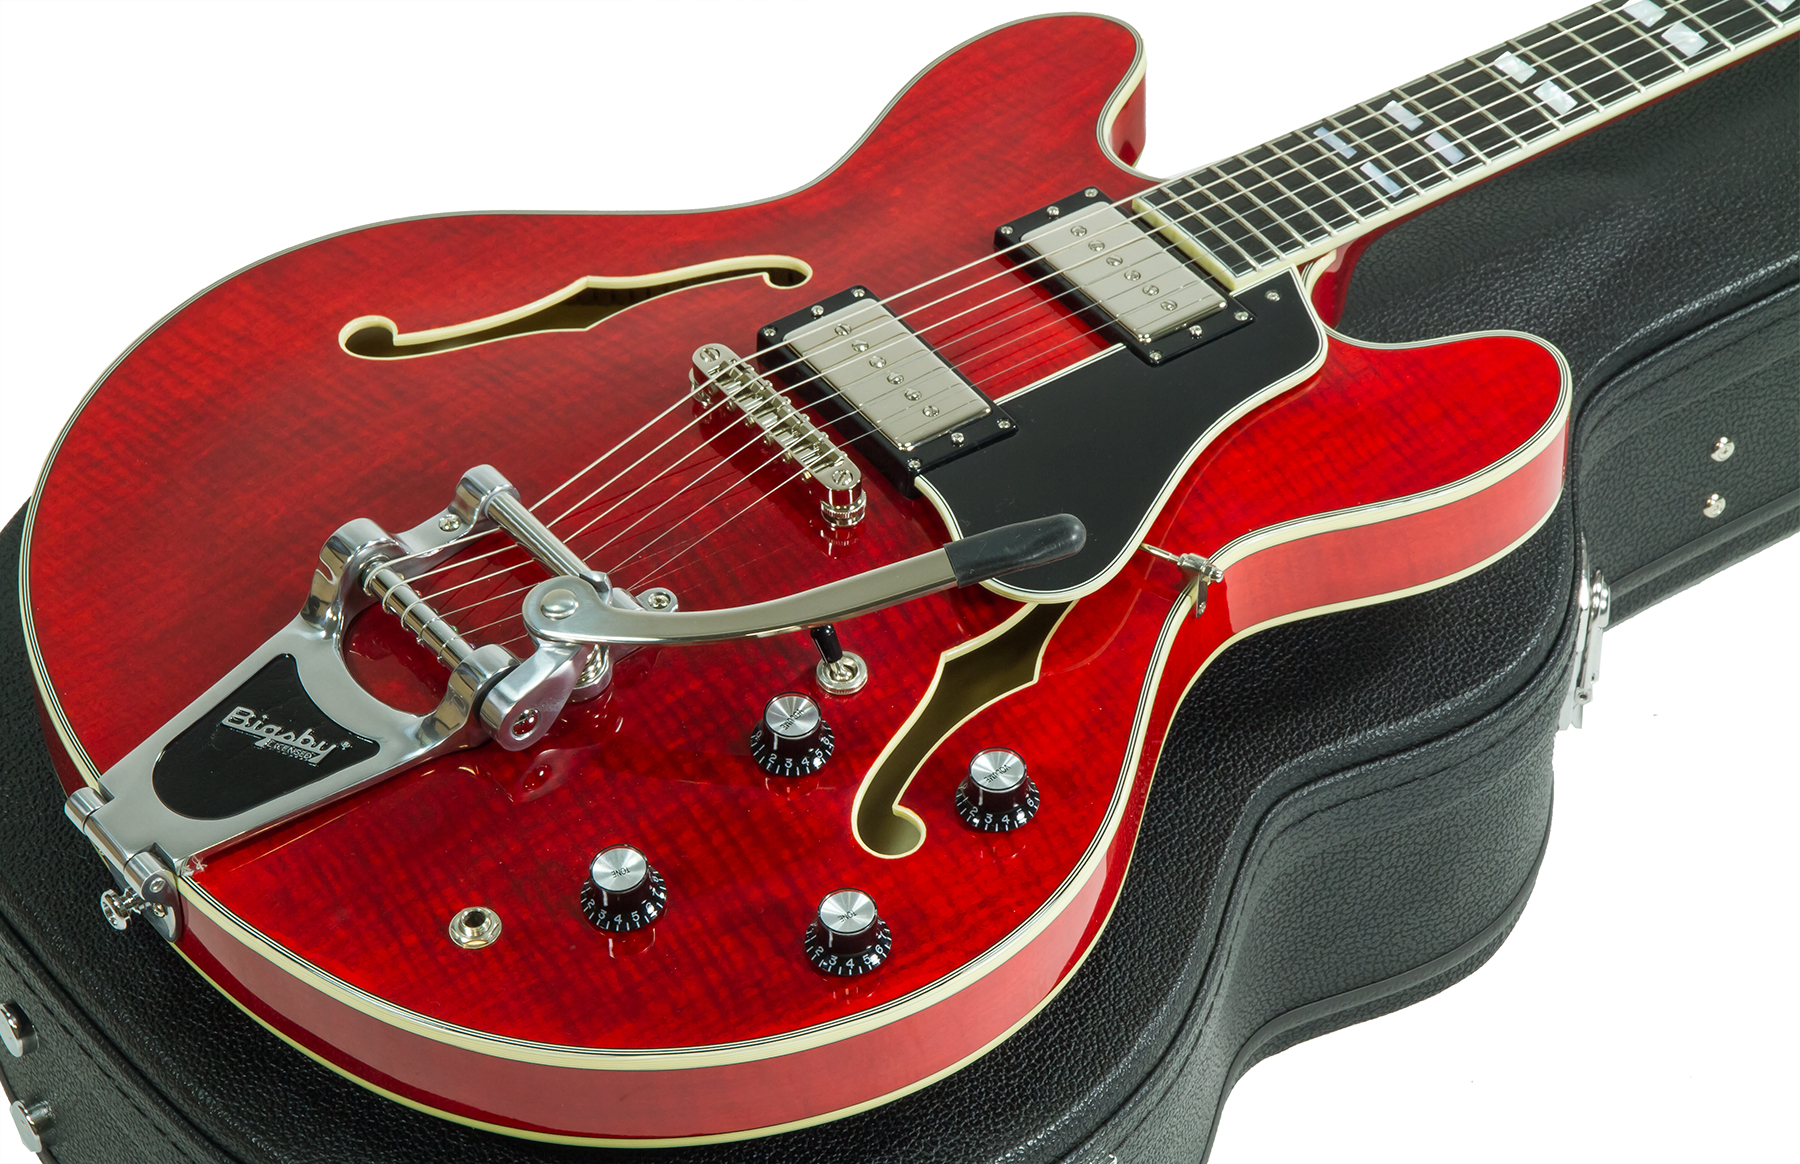 Eastman T486b Thinline Laminate Tout Erable Ss Seymour Duncan Bigsby Eb - Red - Semi-hollow electric guitar - Variation 1